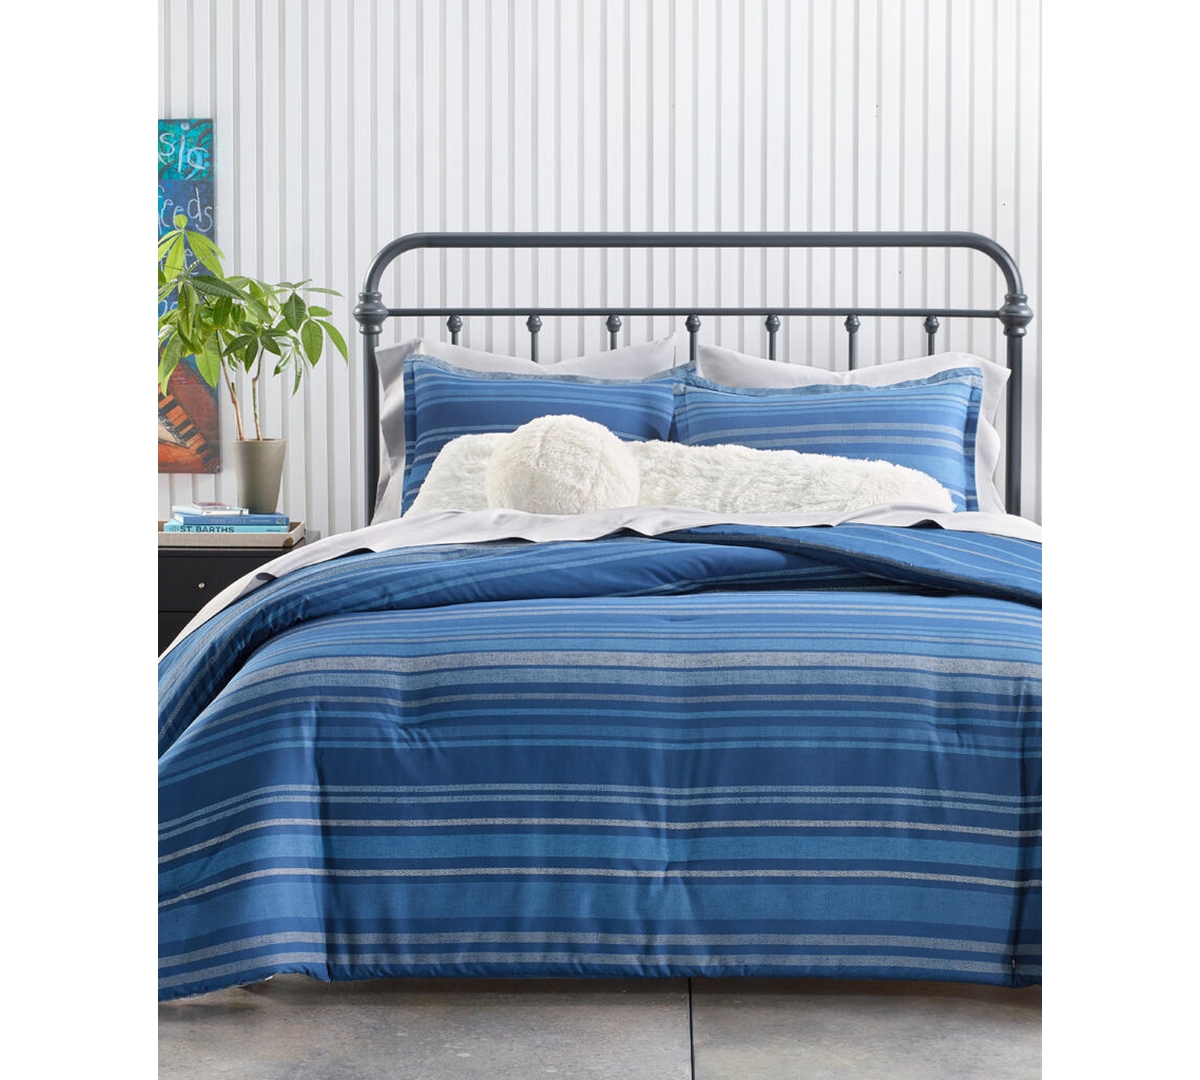 Home Design Chambray Stripe 3-Pc. Comforter Set, Full/Queen, Created for Macys Bedding